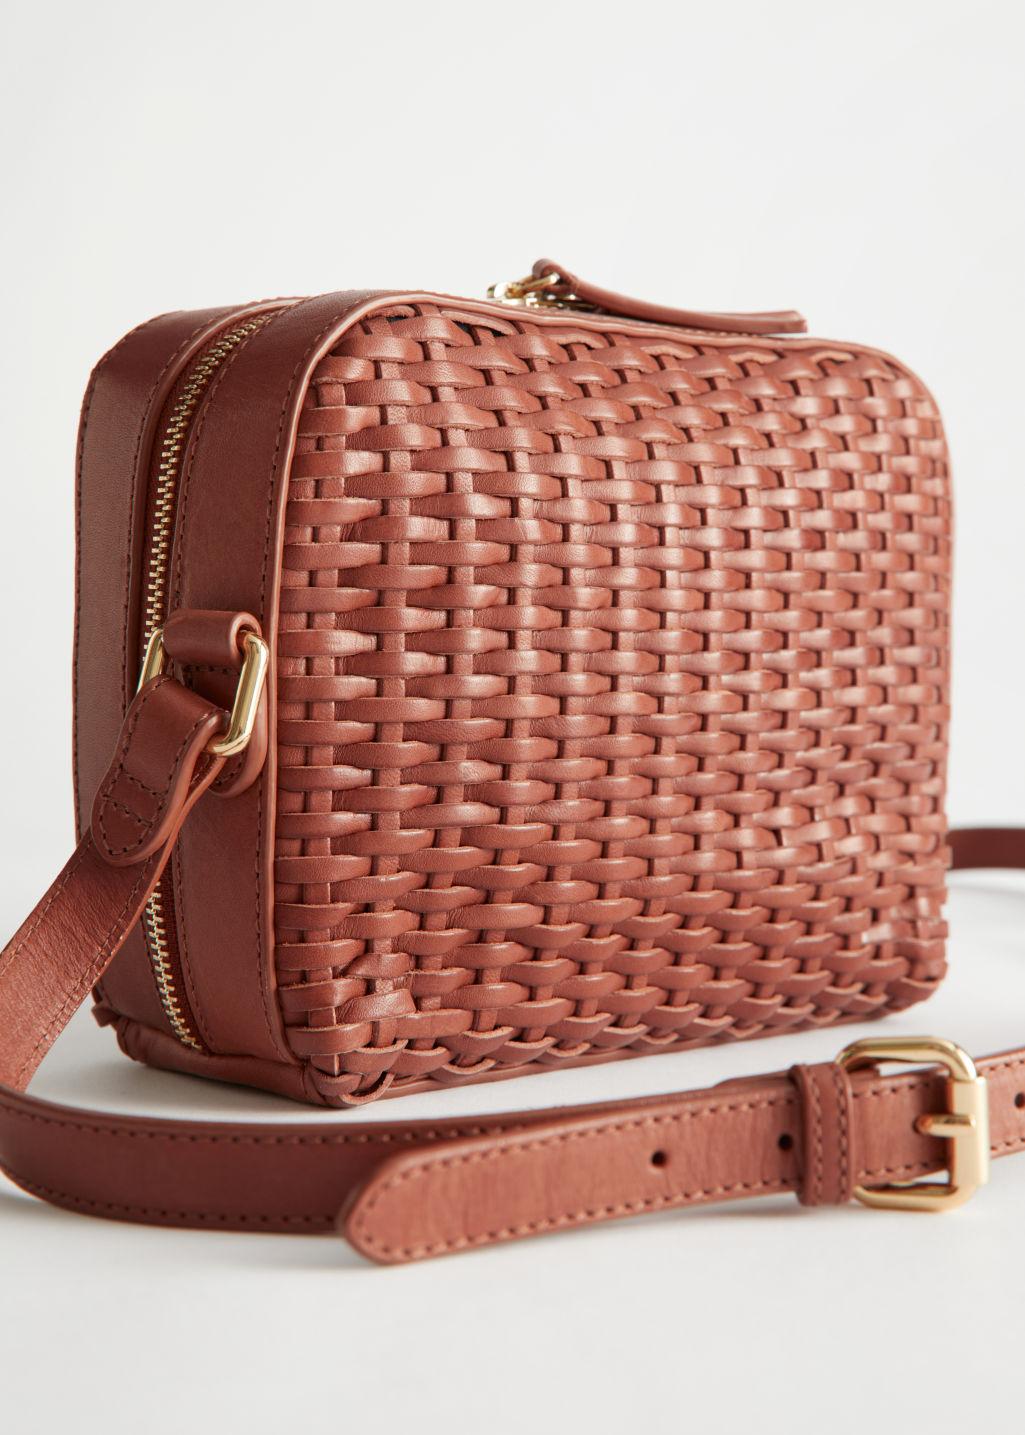 & Other Stories Midi Woven Leather Shoulder Bag in Natural | Lyst Canada